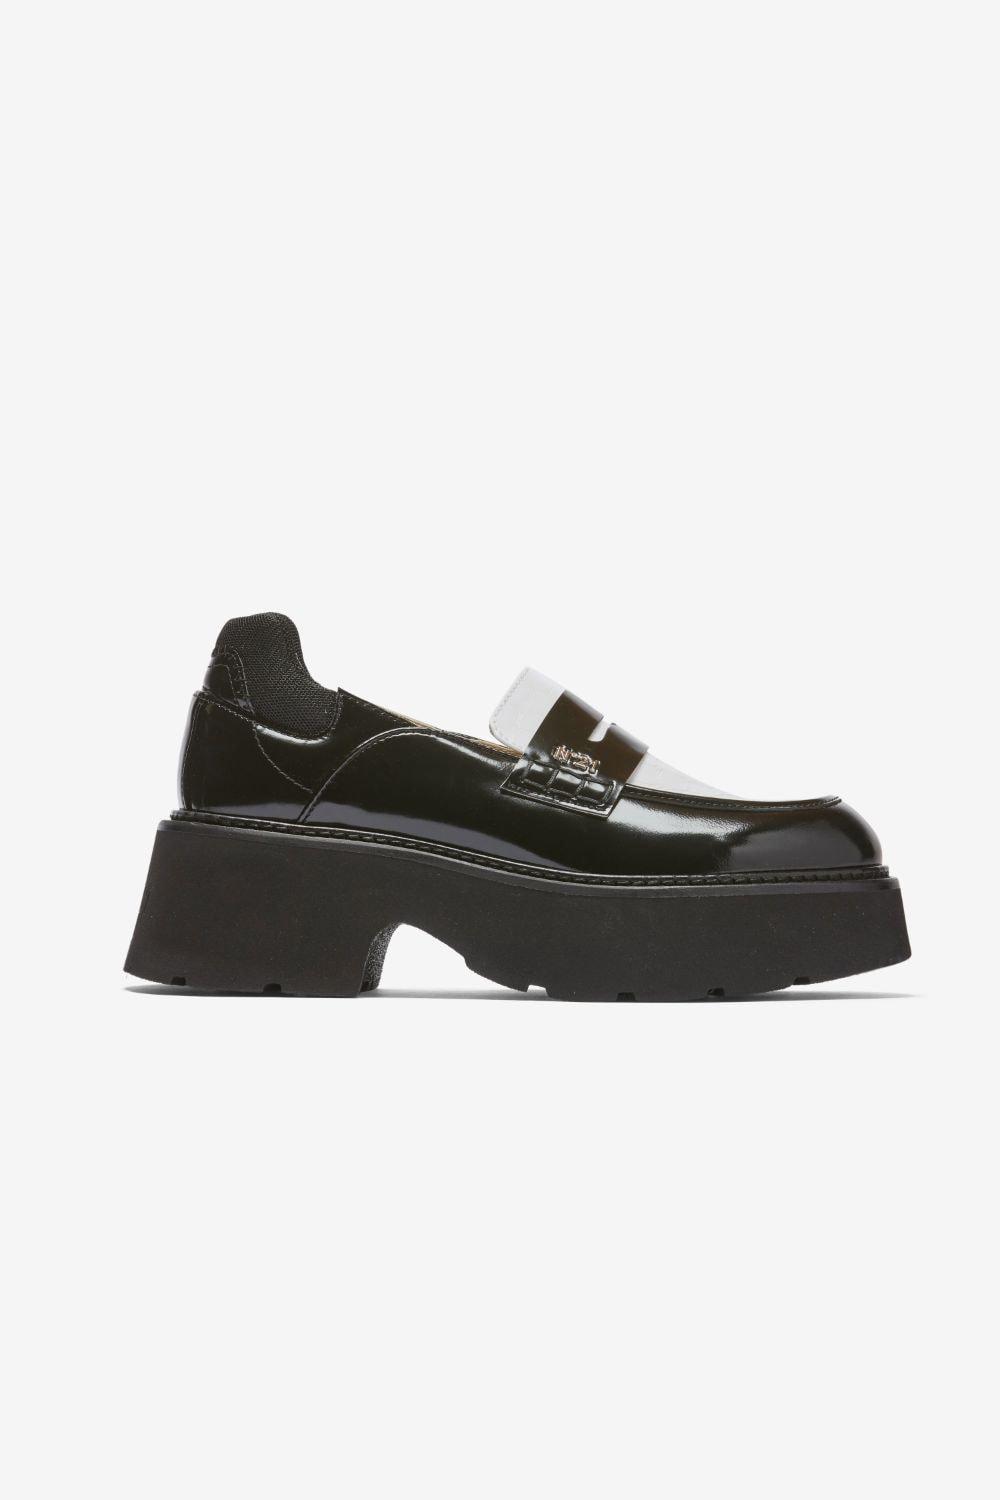 N°21 Two-tone Penny Loafers in Black | Lyst